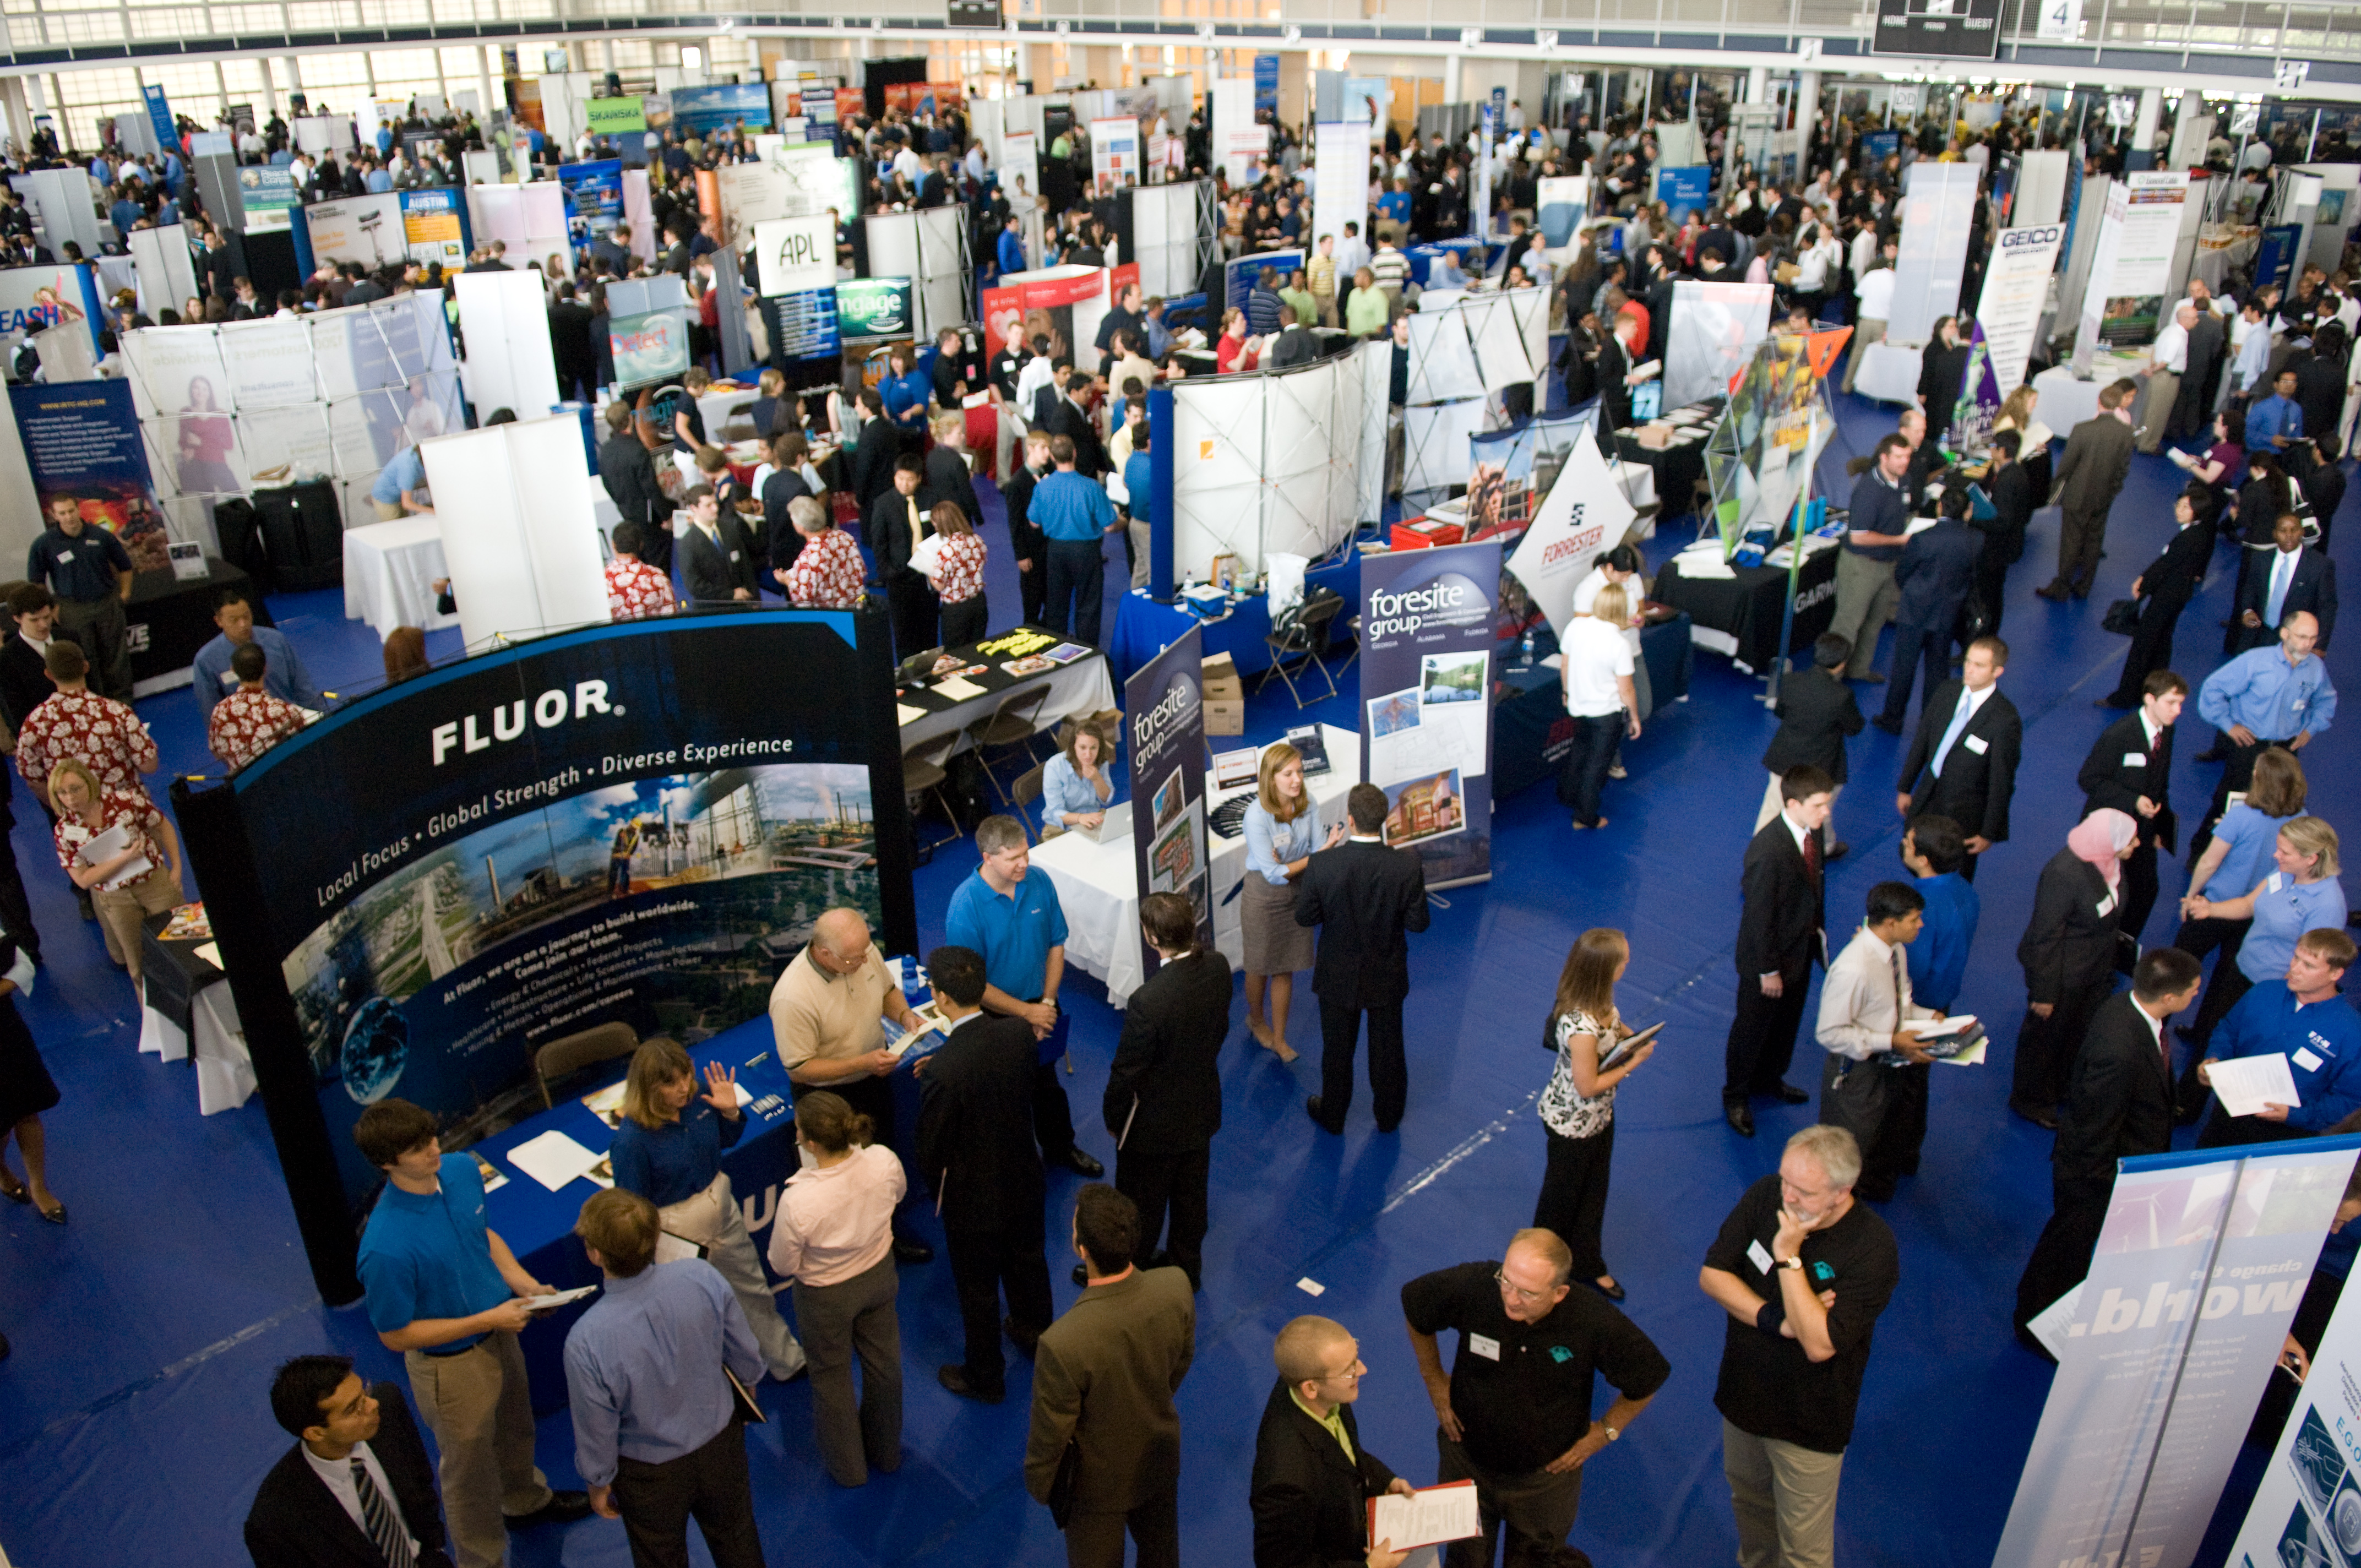 The Georgia Tech Career Fair happens in early September each year. It is the largest recruitment event on campus. 